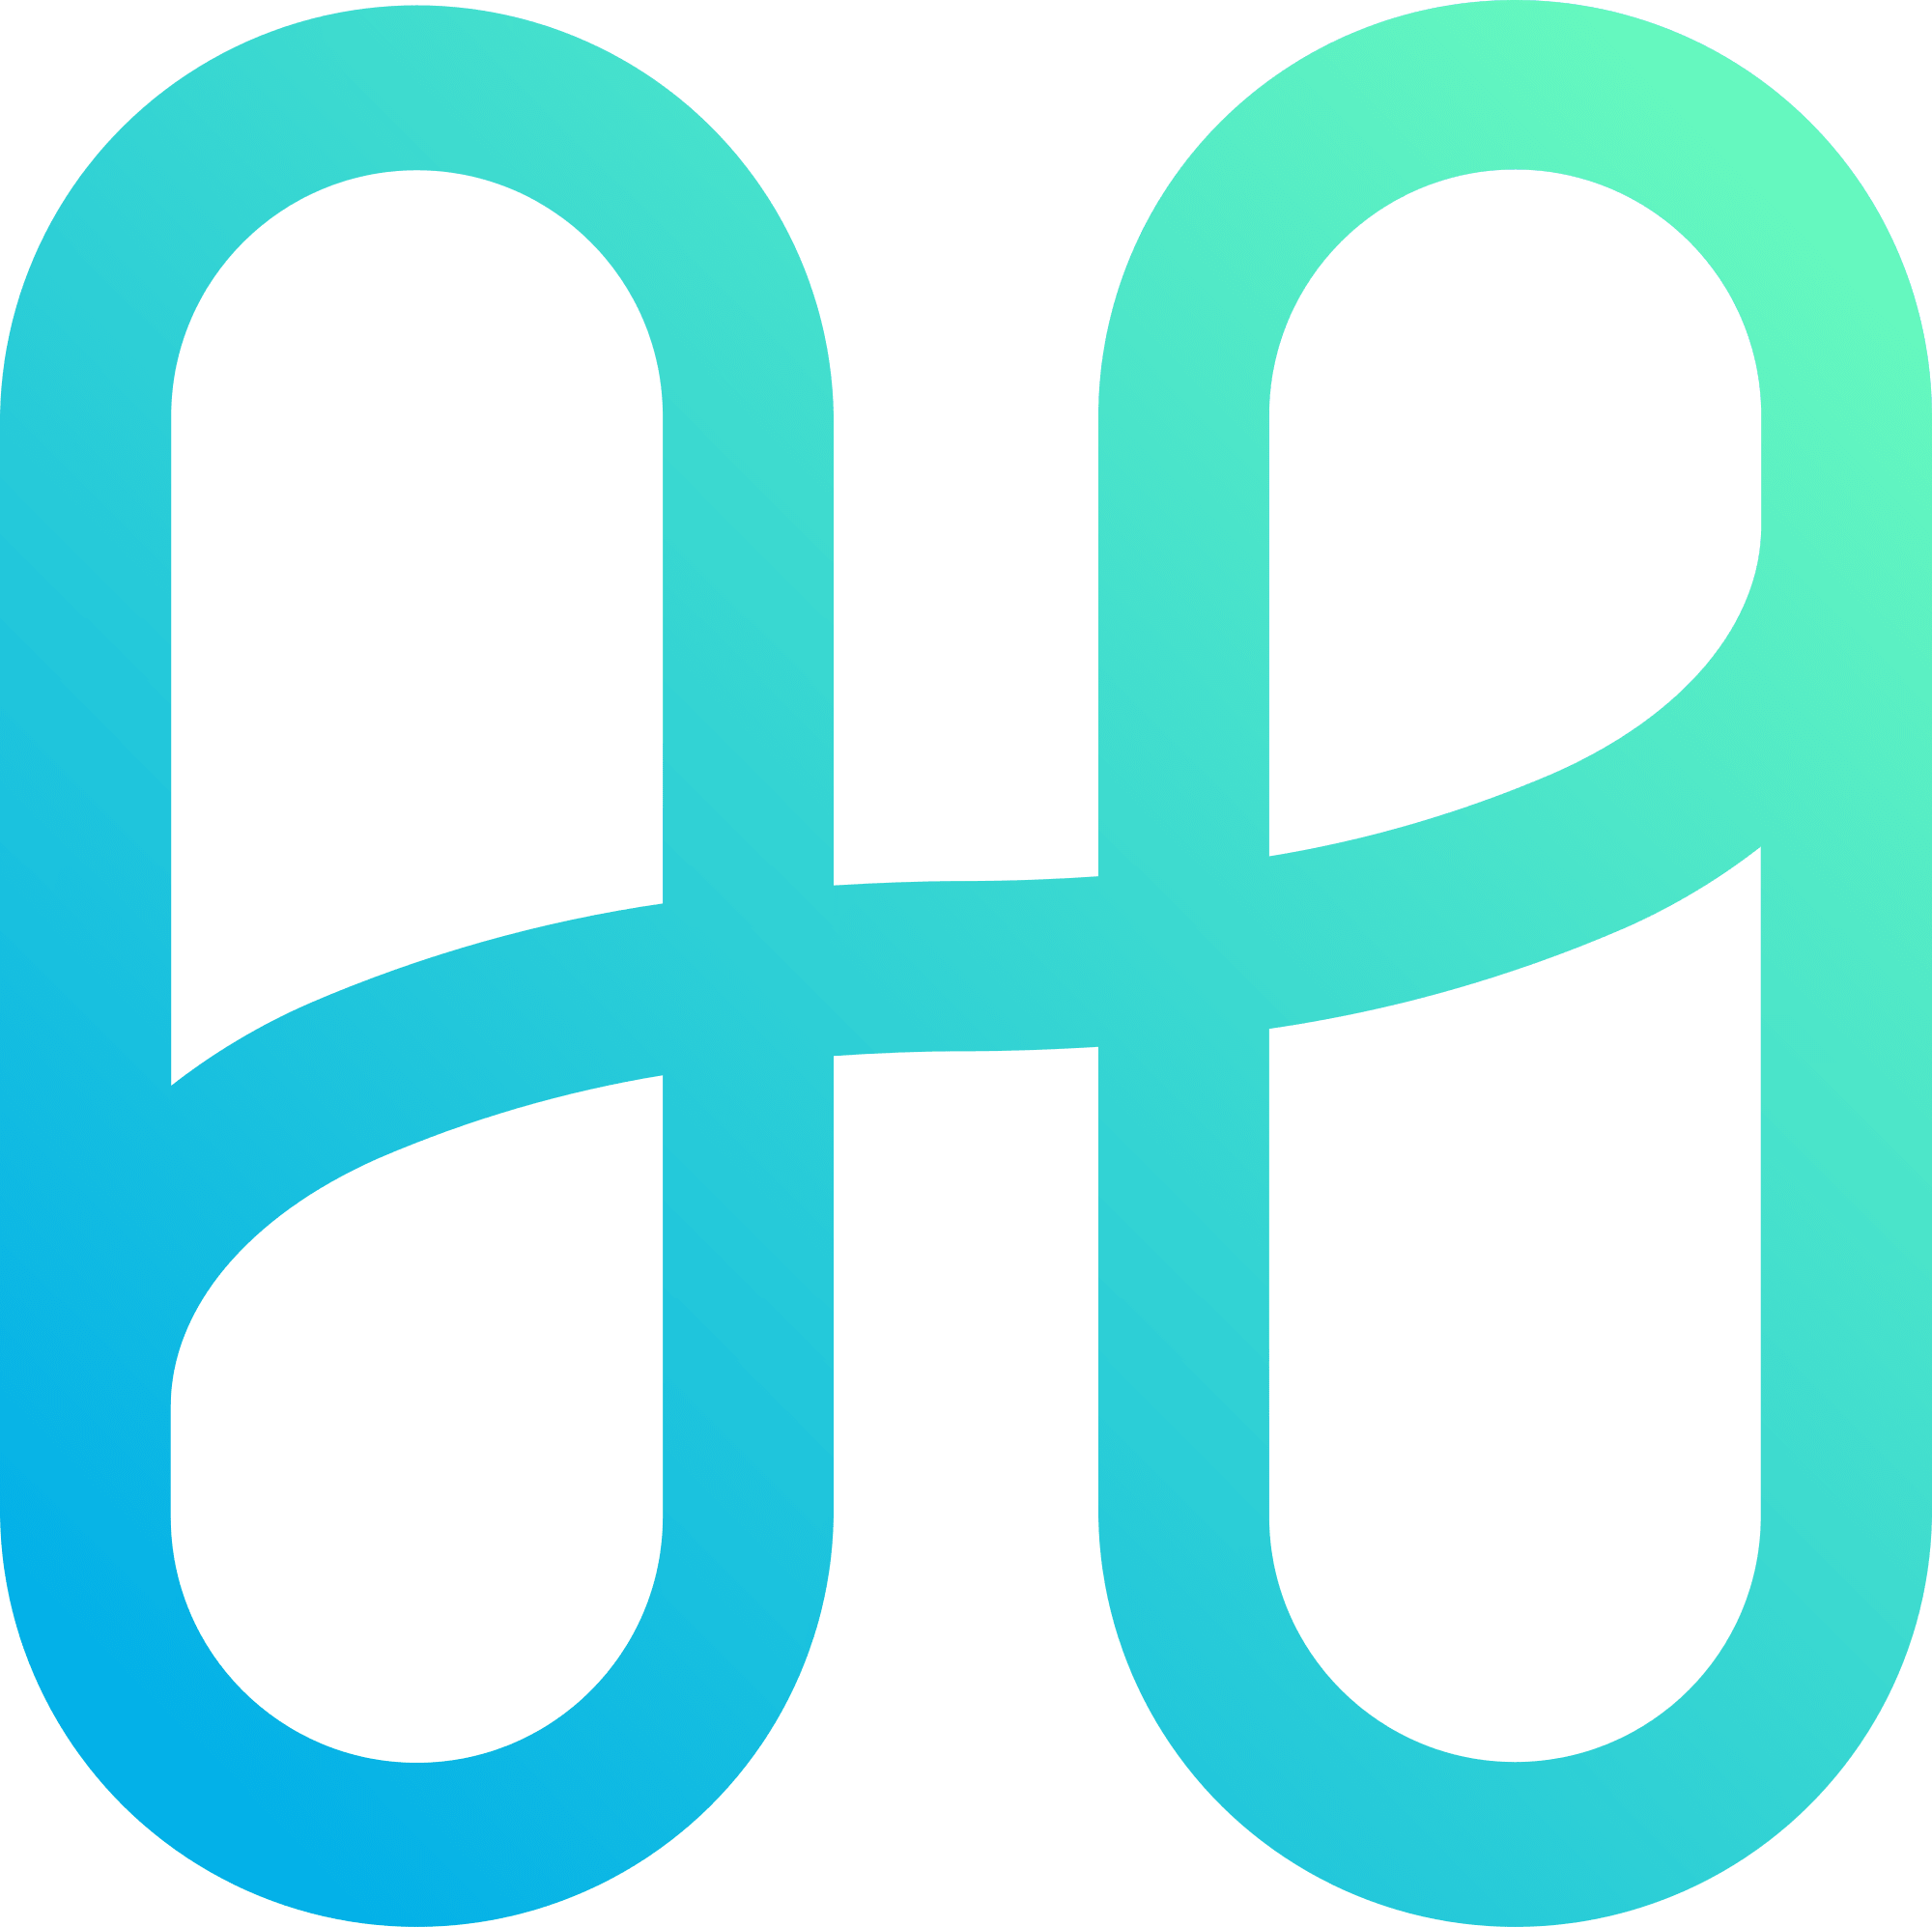 Harmony logo in png format